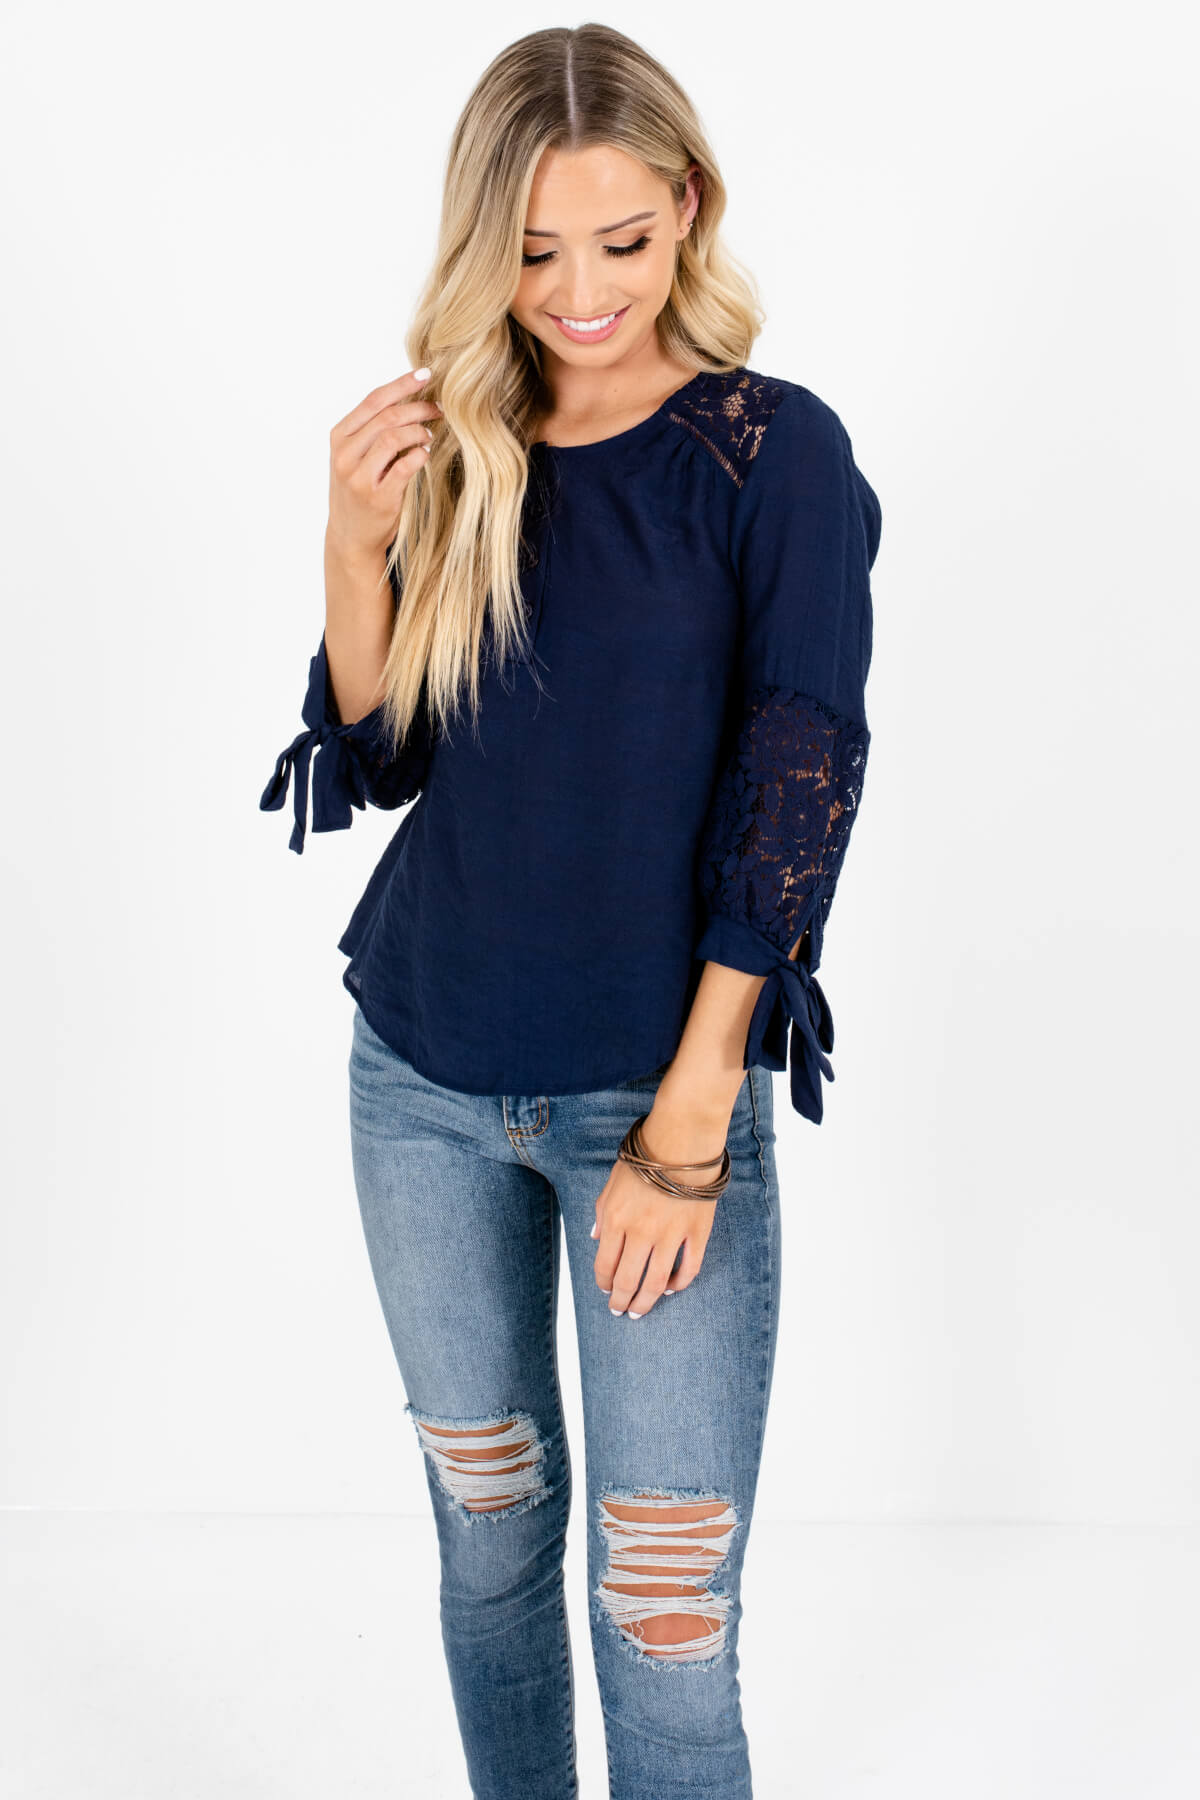 Navy Blue 3/4 Sleeve Crochet Lace Tops Affordable Online Boutique